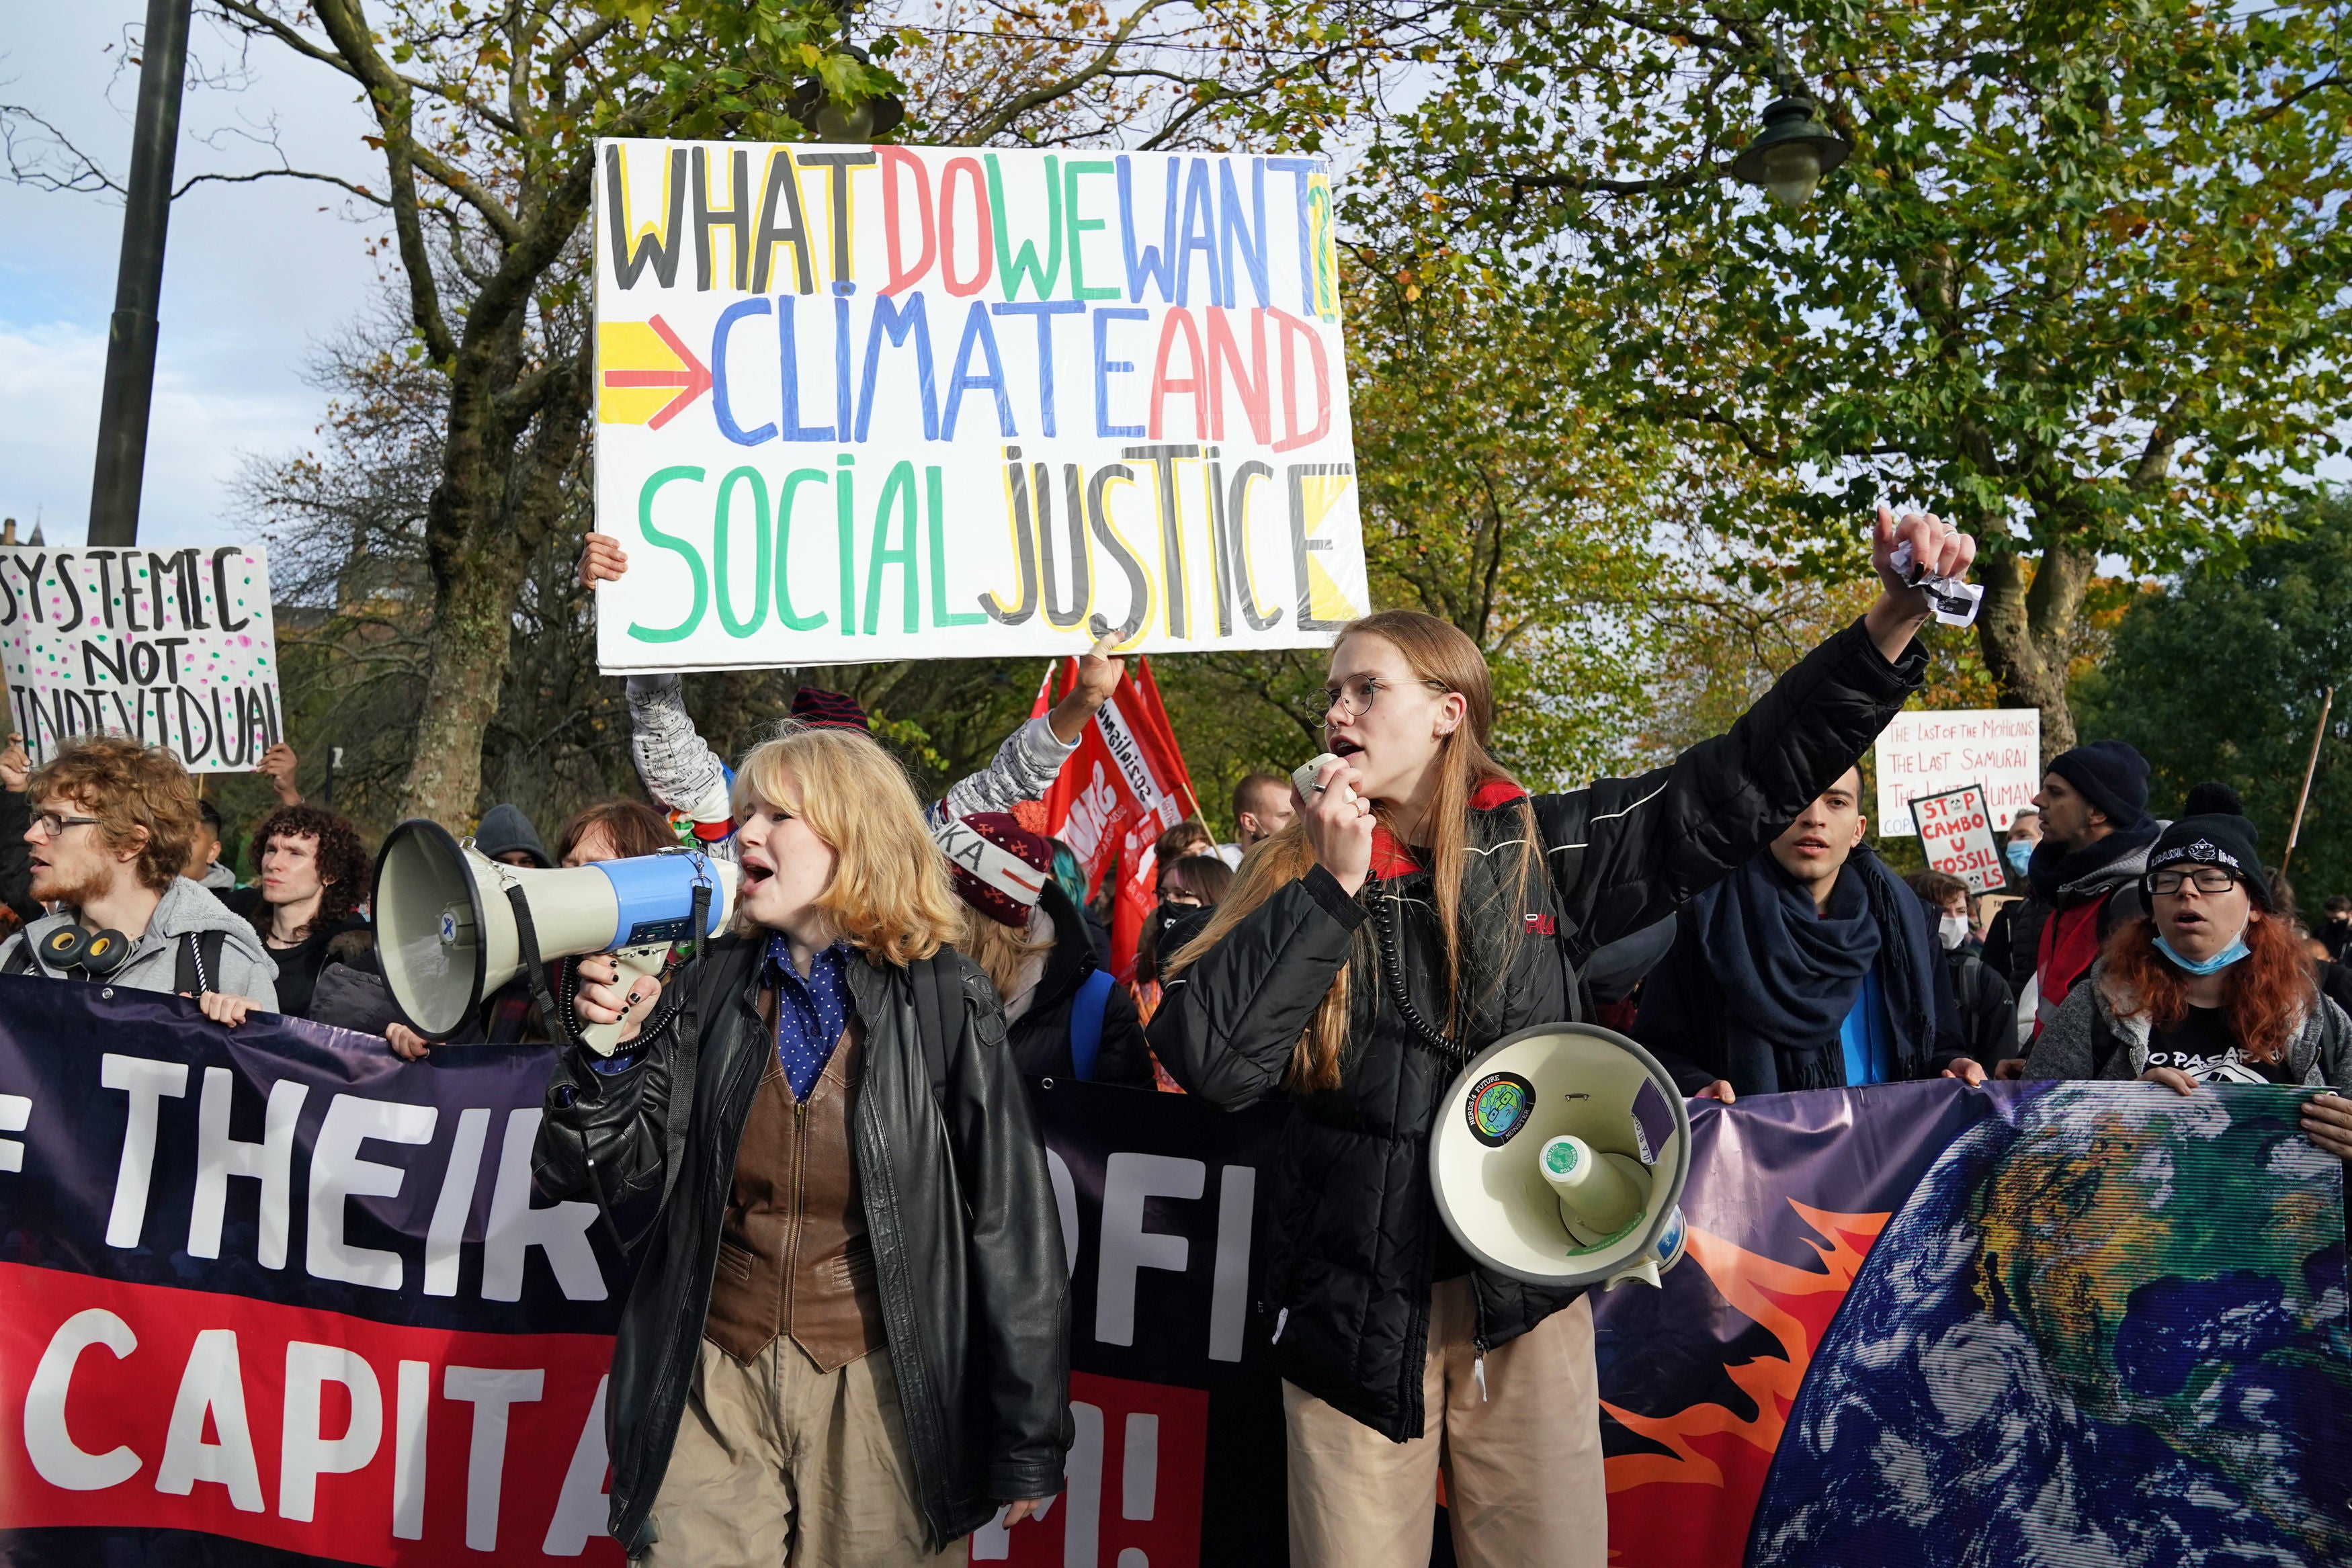 The growing time pressure and the escalating climate crisis have changed our activism